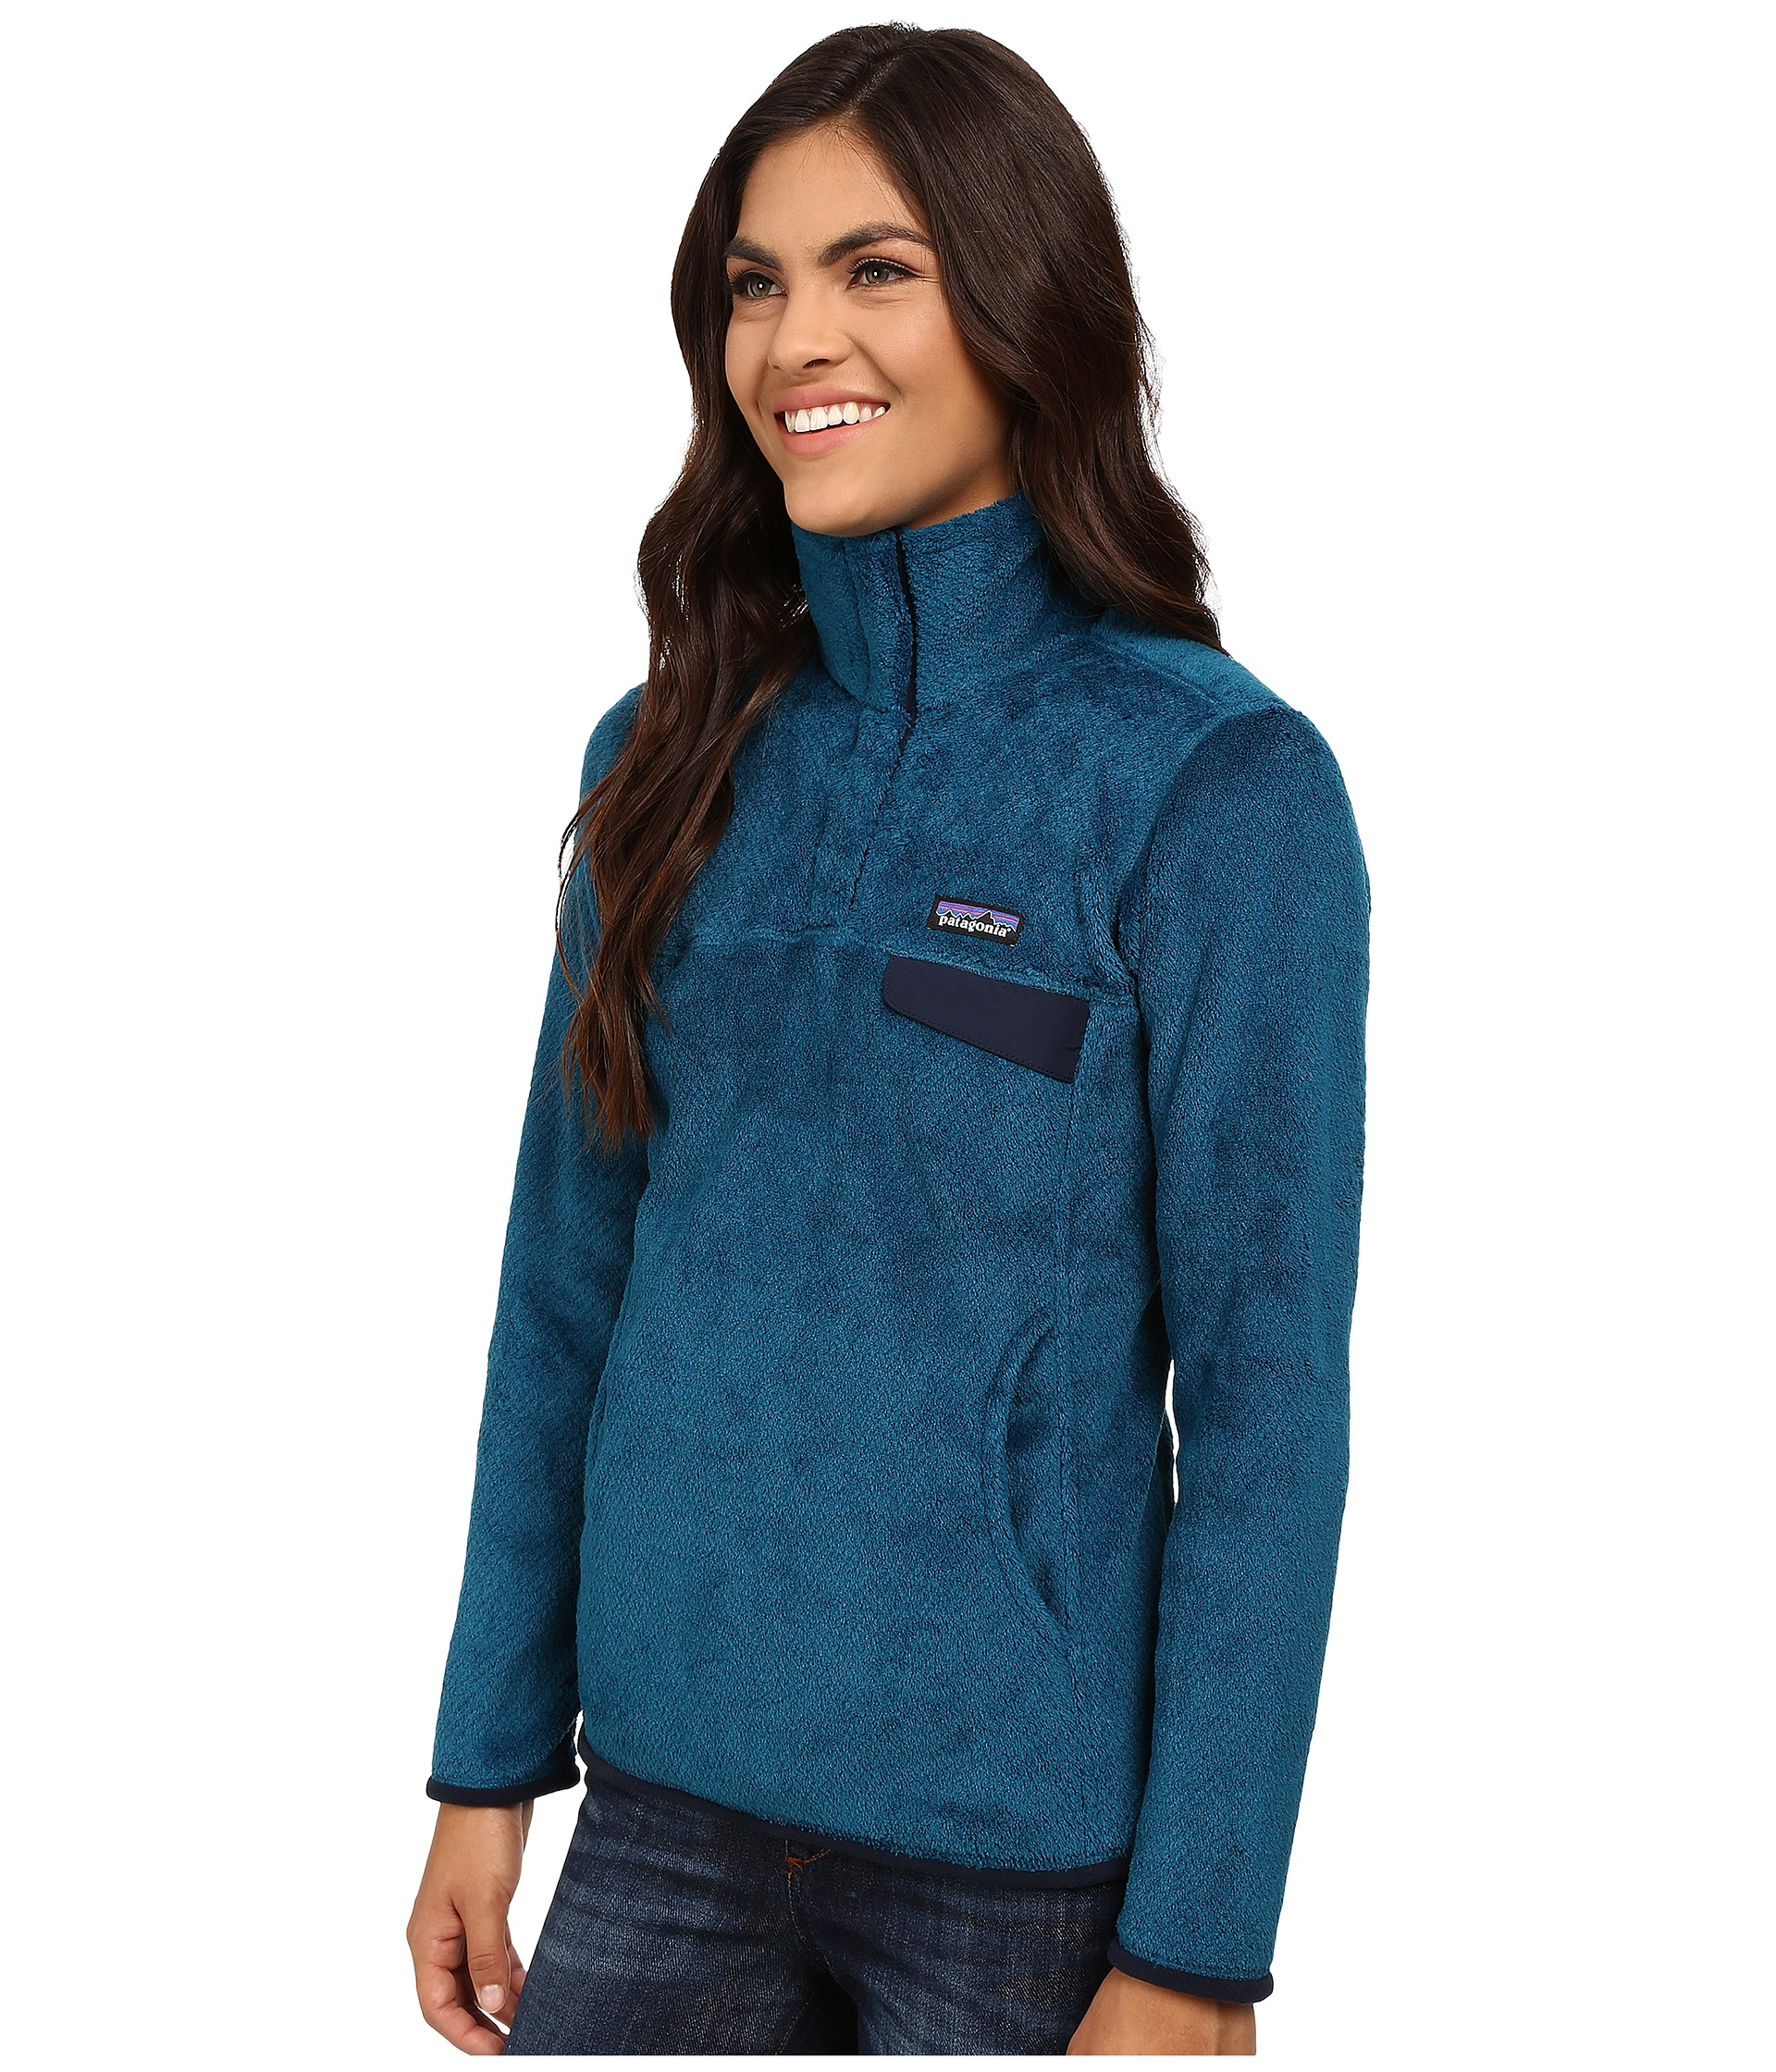 Lyst - Patagonia Re-tool Snap-t® Fleece Pullover in Blue